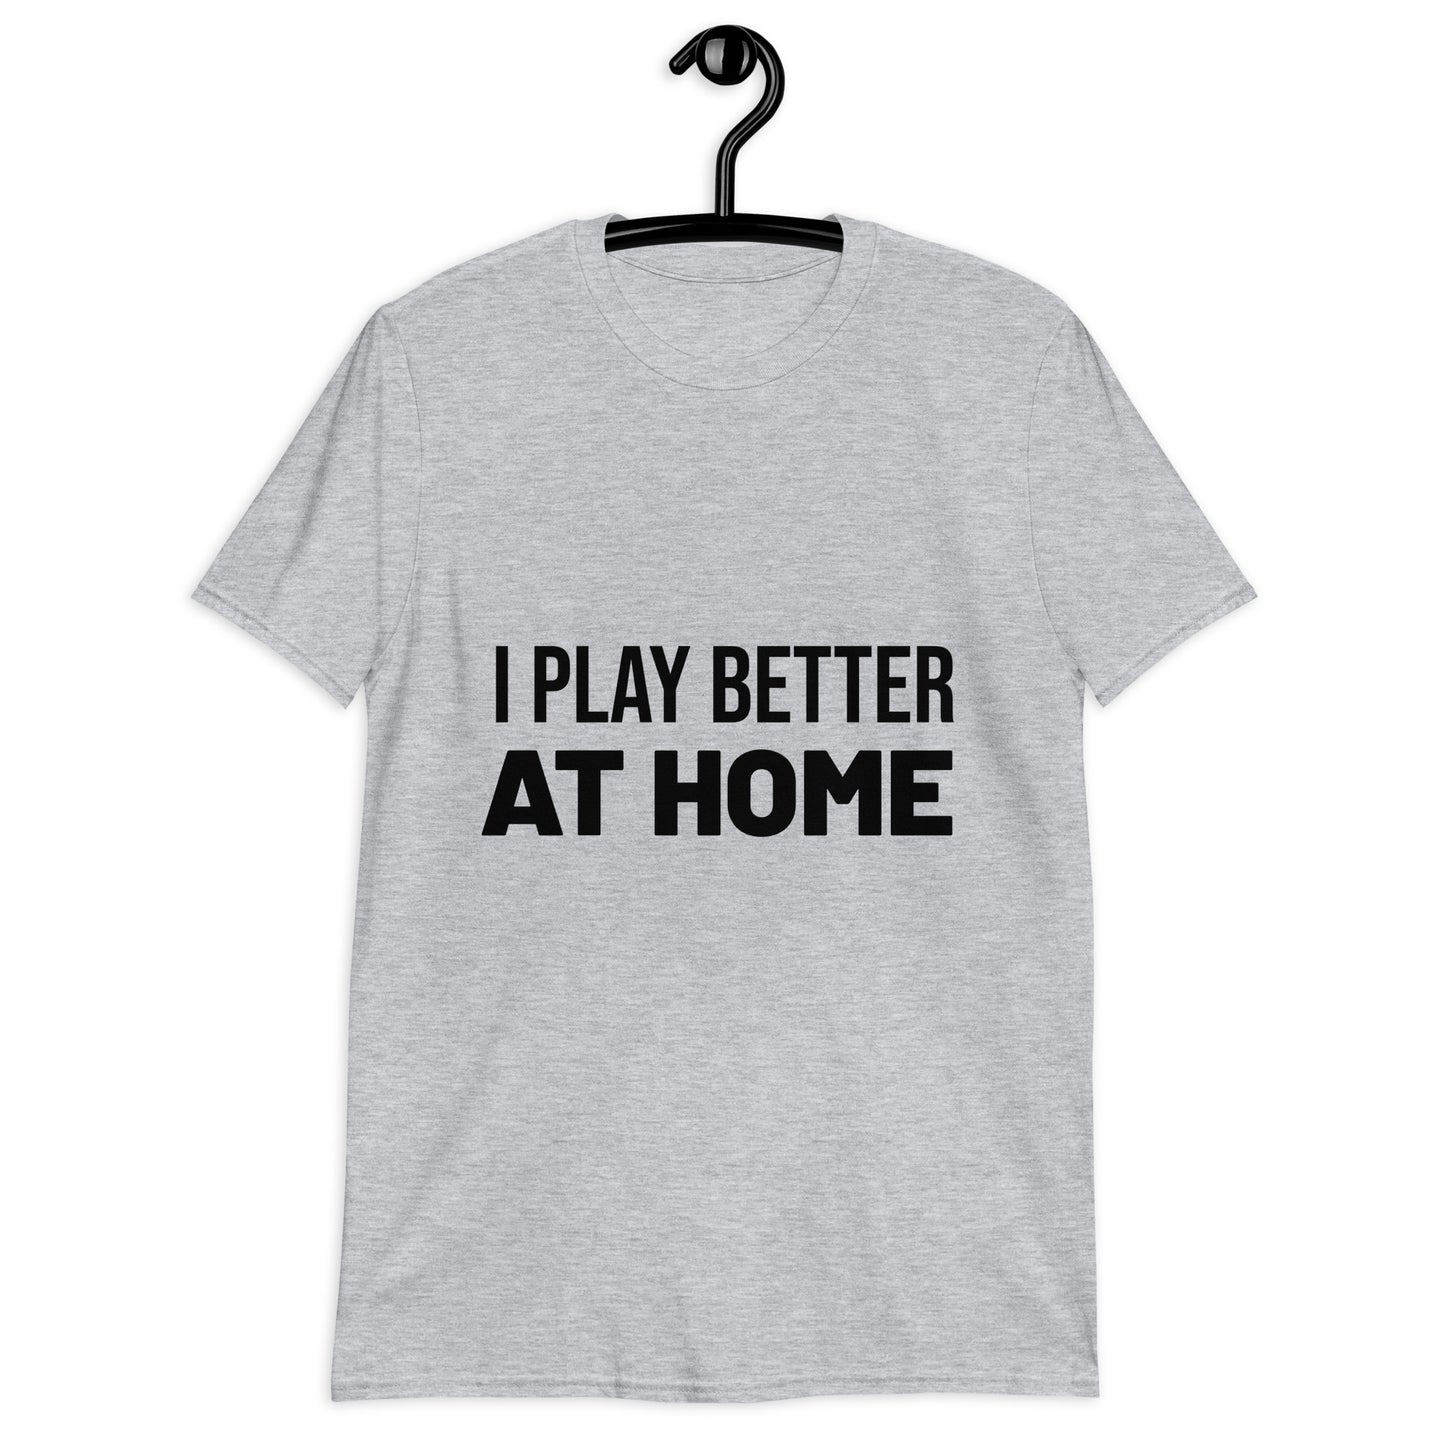 I play better at home -  Unisex T-Shirt